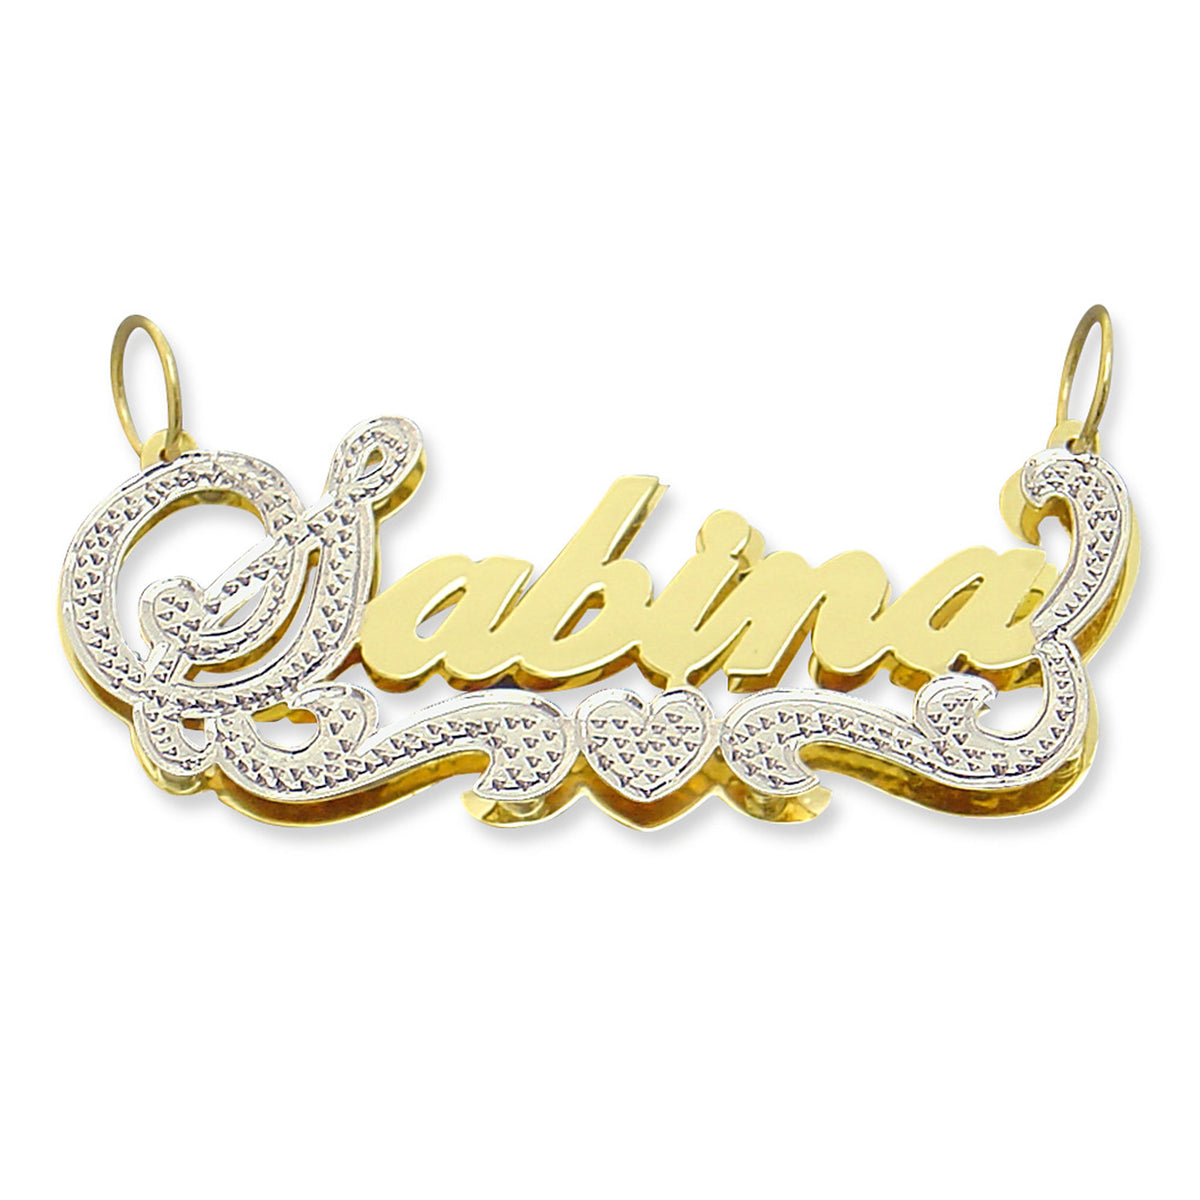 Real Solid Gold 10k or 14k Solid Gold Personalized Jewelry 3D Double Plates Iced Out Name Pendant Charm Heart 2 Tone ND25